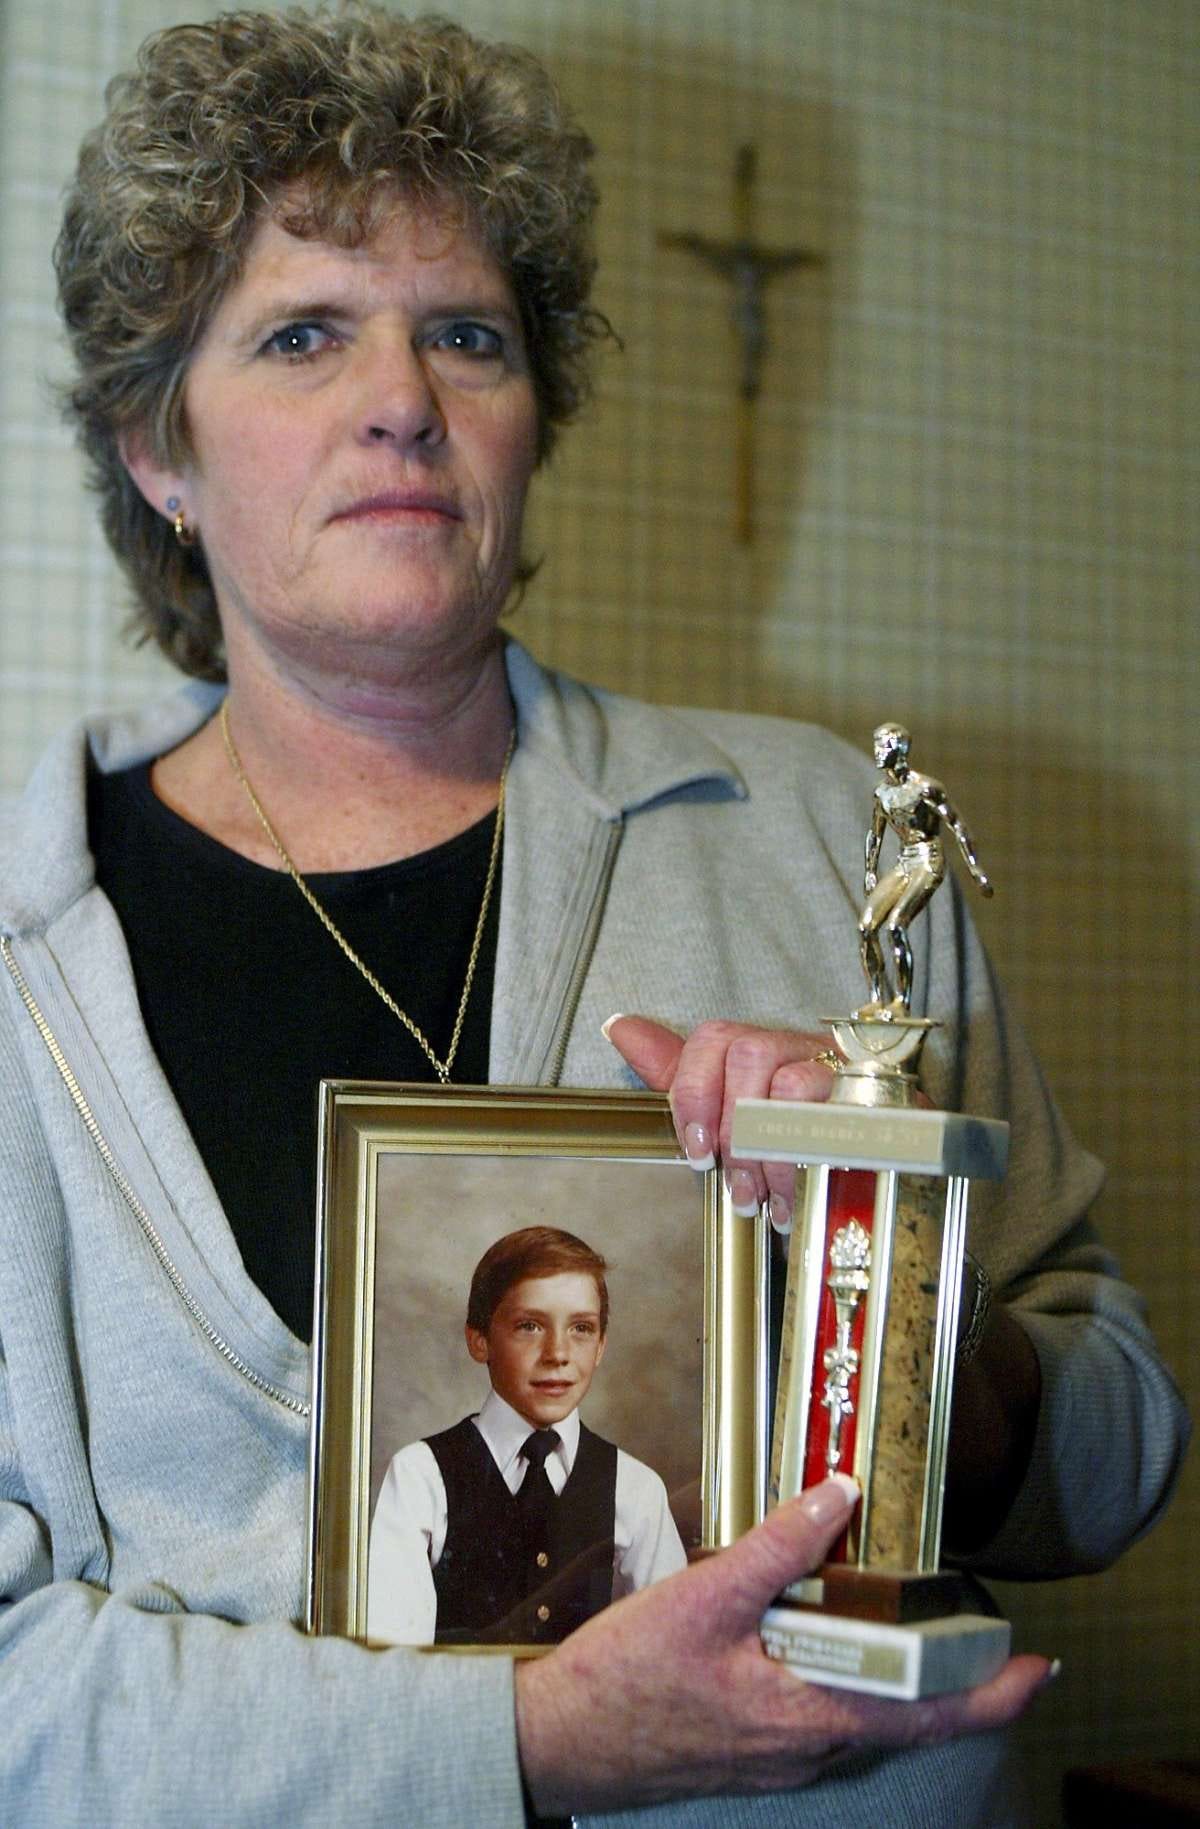 Mary Ann Hughes, poses with a photo of her late son Christopher, then six, Friday Jan.30, 2004, at her home in Chino Hills, Calif. On a June night in 1983, her son Christopher was having a sleepover at the sprawling, hill-top Chino Hills home of Douglas and Peggy Ryen with their two children, Jessica, 10, and Joshua, 8, when they were attacked by someone using a hatchet and a knife. Twenty-one years later, she said she has reserved seats to the convicted killer's execution. And she's keeping her fingers crossed last ditch efforts by celebrities such as Denzel Washington and Mike Farrell to keep Kevin Cooper alive won't get his Feb. 10 execution date postponed.(AP Photo/Damian Dovarganes) Mary Ann Hughes shows a photo of her son, Chris, 6 years old when the picture was taken, at her home in Chino Hills (San Bernardino County). Chris and three others were killed in June 1983.